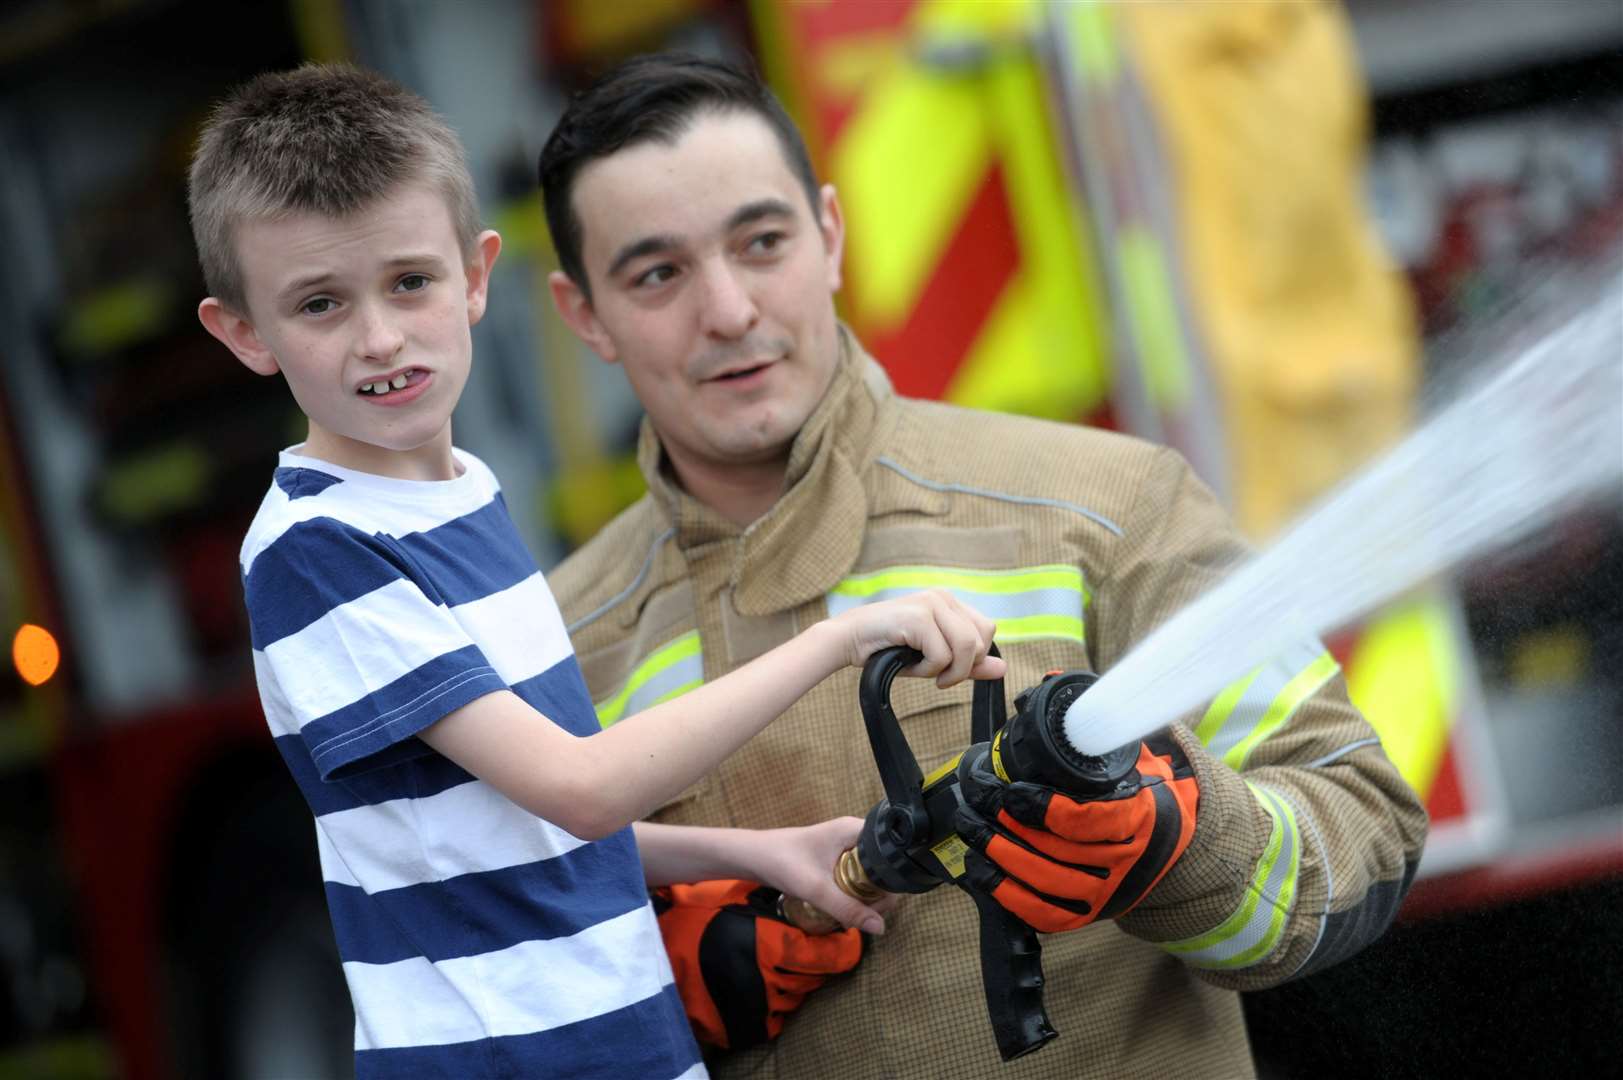 Fireman Dave Dugdale shows one of the children how to use the fire hose.